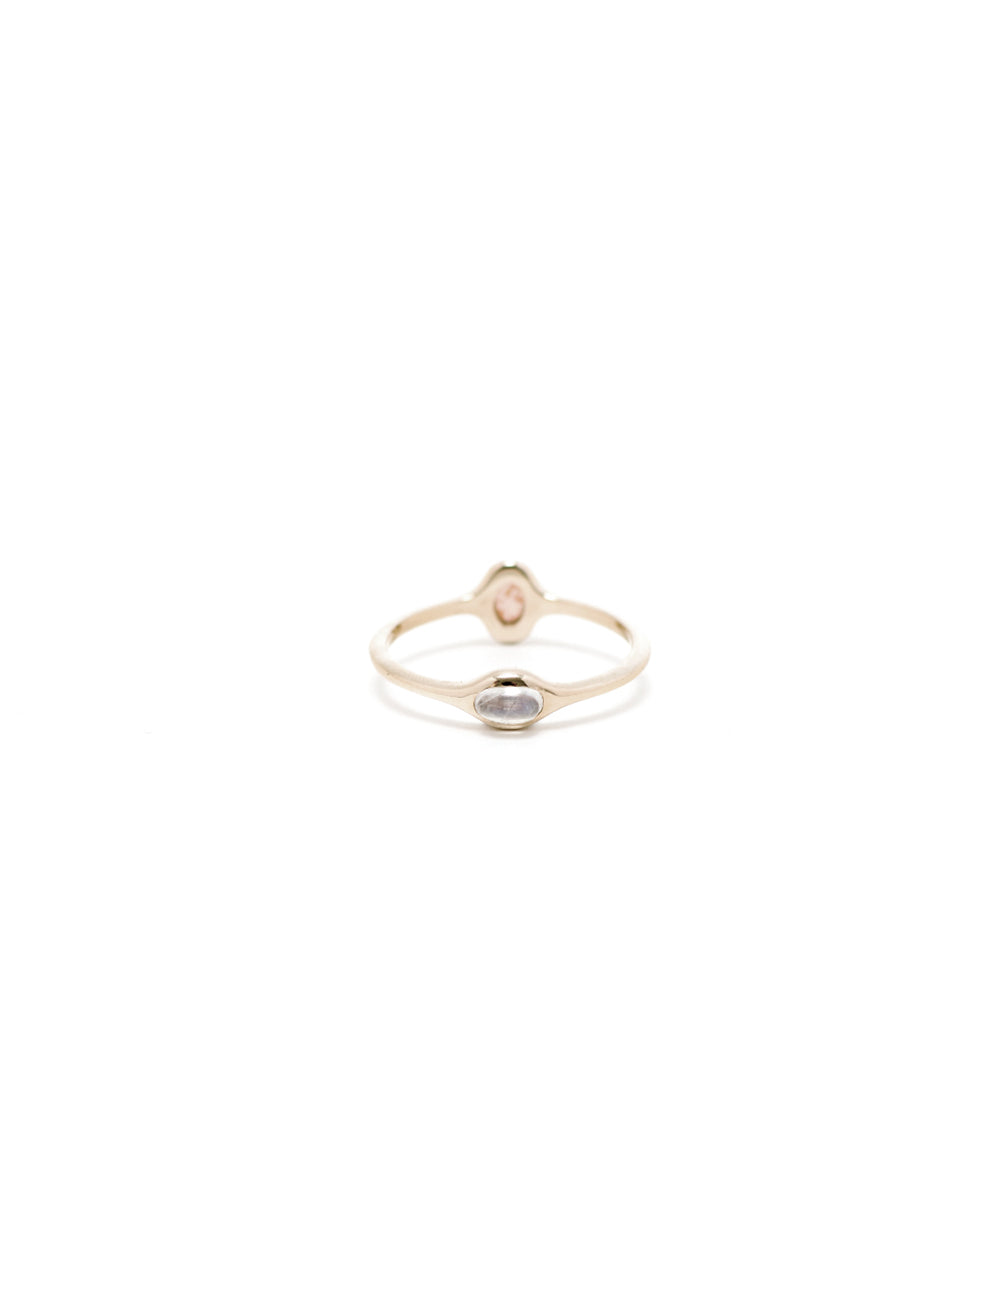 Day & Night Ring with Sunstone and Moonstone | I Like It Here Club